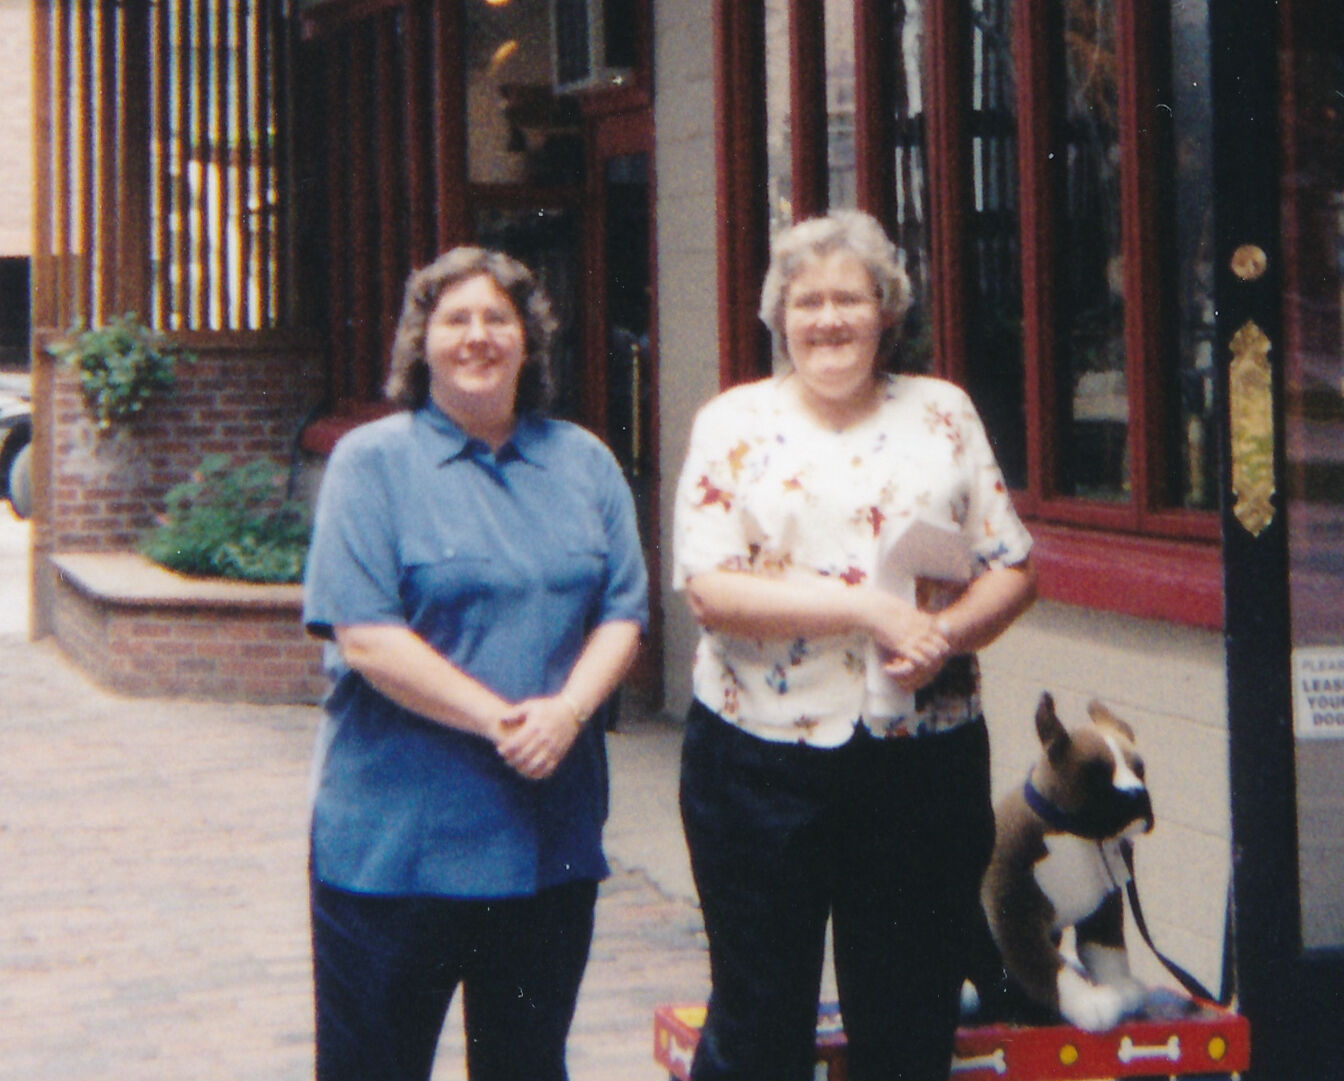 Two women standing side by side on a brick walkway in front of a building with glass windows and a red door; an artificial dog figure is placed on the ground beside them.